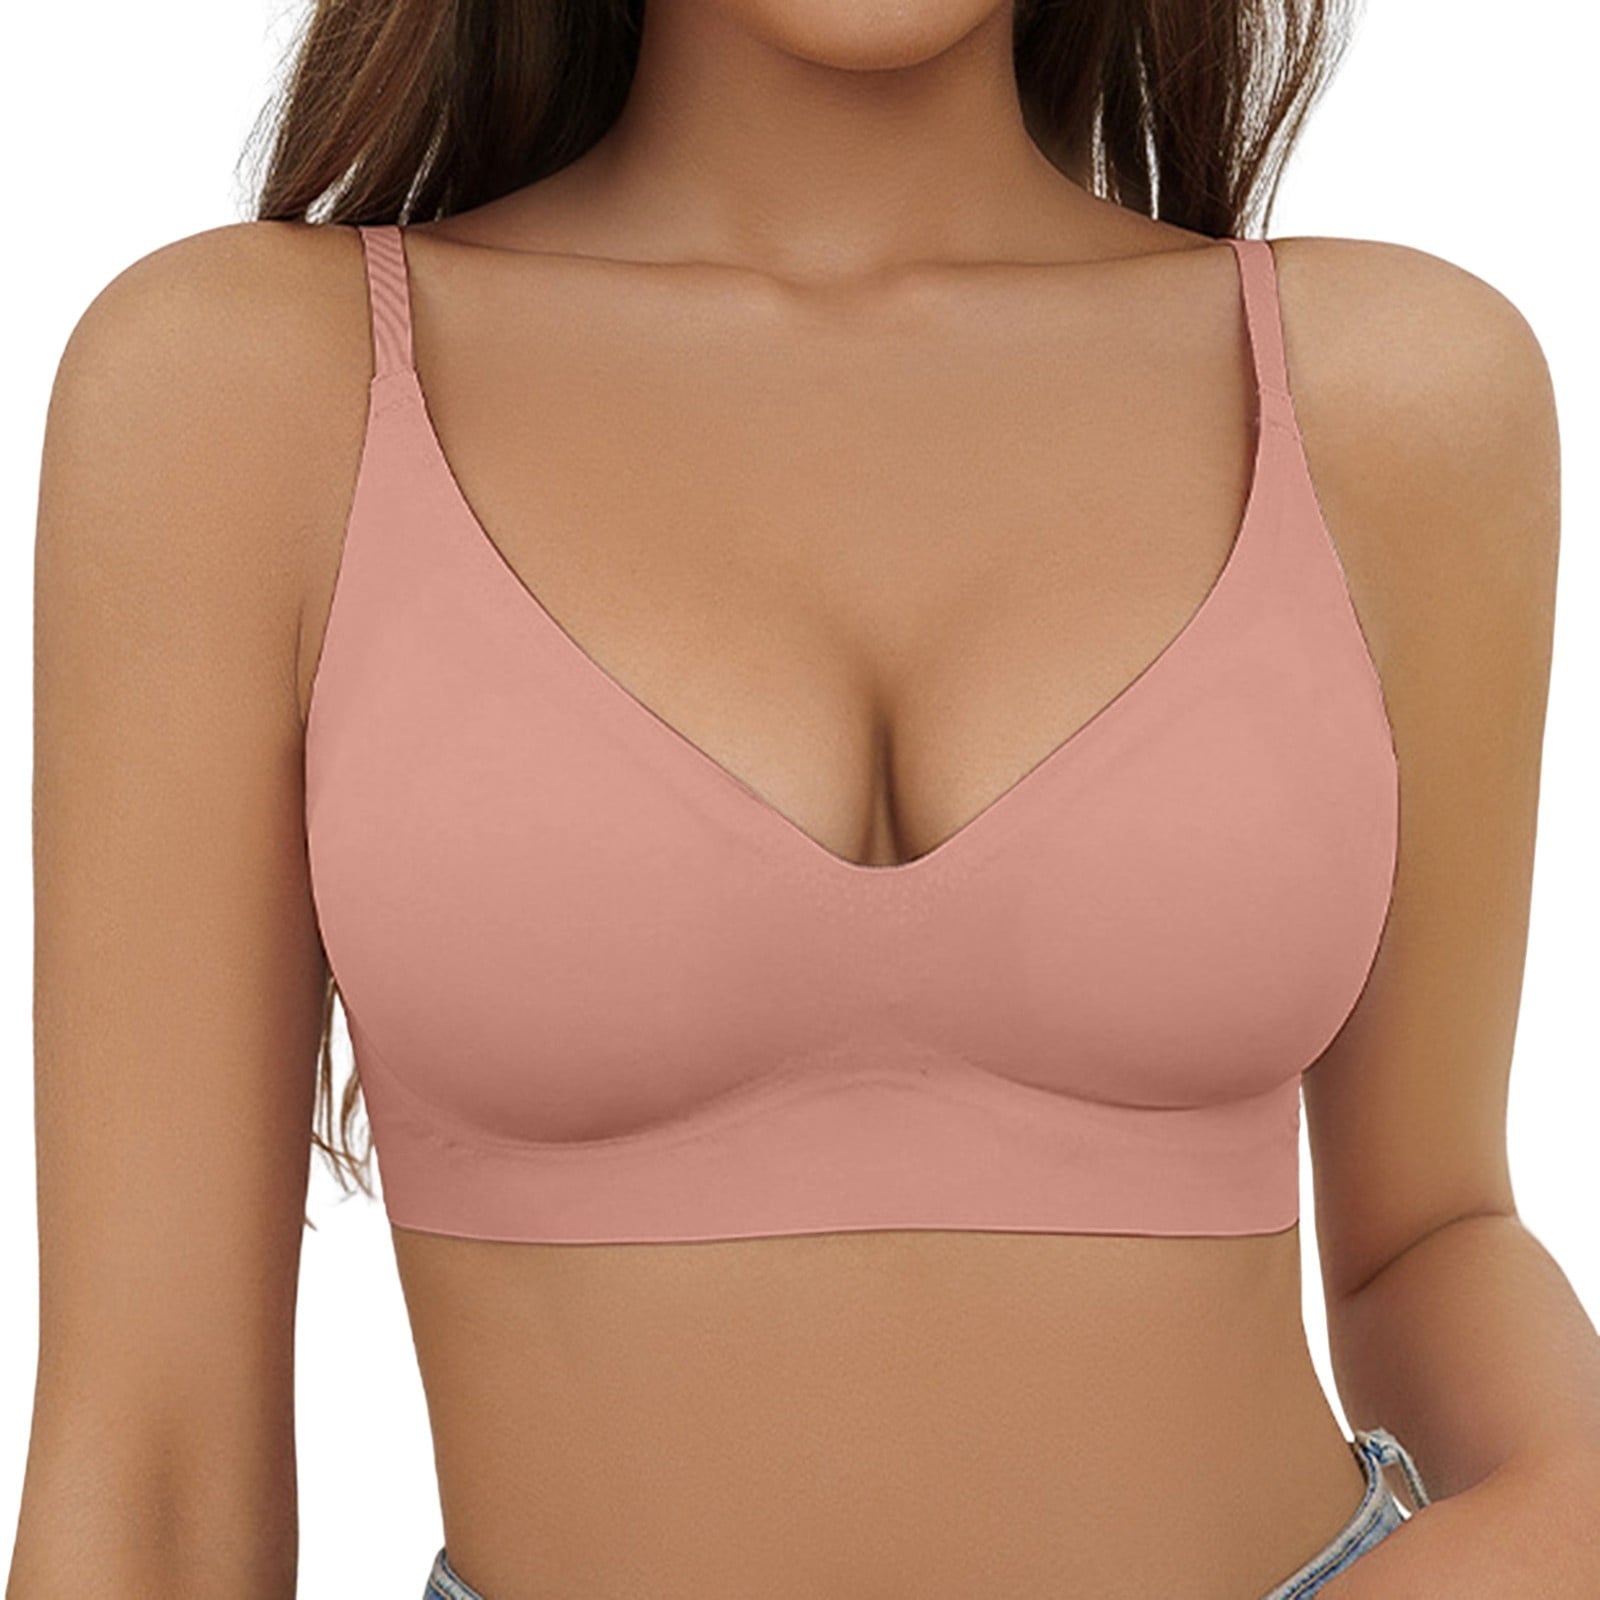 Solid Triangle Seamless Wireless Bra RosyBrown